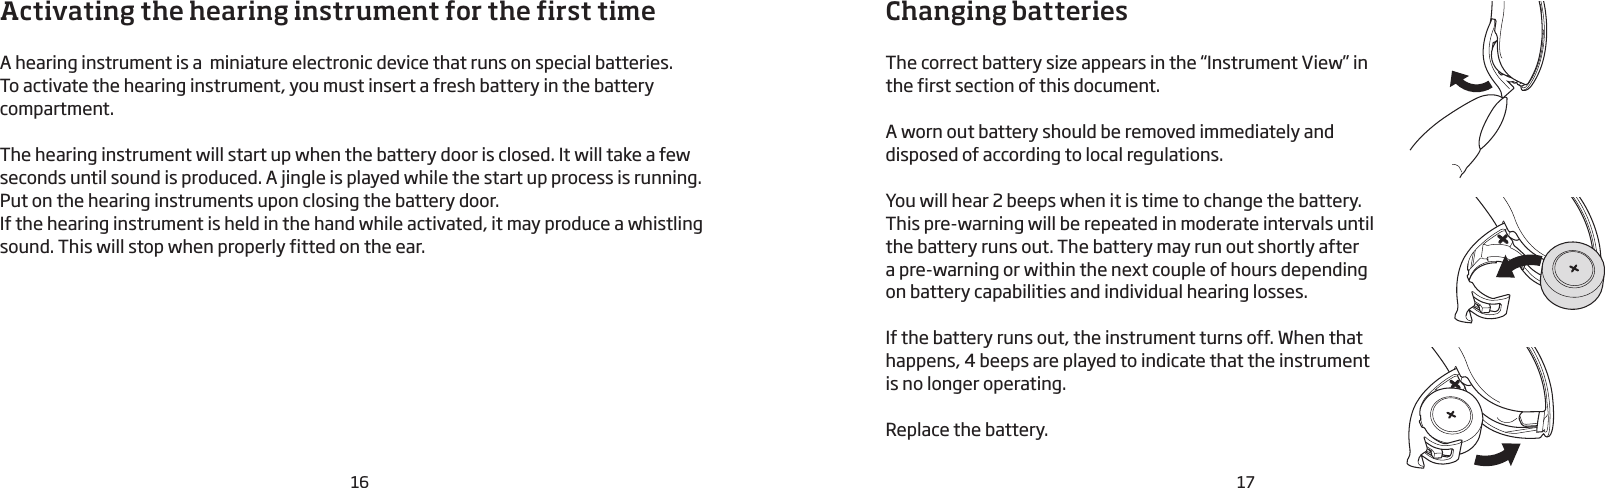 17Changing batteriesThe correct battery size appears in the “Instrument View” in the first section of this document.A worn out battery should be removed immediately and disposed of according to local regulations. You will hear 2 beeps when it is time to change the battery. This pre-warning will be repeated in moderate intervals until the battery runs out. The battery may run out shortly after  a pre-warning or within the next couple of hours depending on battery capabilities and individual hearing losses. If the battery runs out, the instrument turns off. When that happens, 4 beeps are played to indicate that the instrument is no longer operating. Replace the battery.Activating the hearing instrument for the first timeA hearing instrument is a  miniature electronic device that runs on special batteries. To activate the hearing instrument, you must insert a fresh battery in the battery compartment. The hearing instrument will start up when the battery door is closed. It will take a few seconds until sound is produced. A jingle is played while the start up process is running.Put on the hearing instruments upon closing the battery door. If the hearing instrument is held in the hand while activated, it may produce a whistling sound. This will stop when properly fitted on the ear. 16